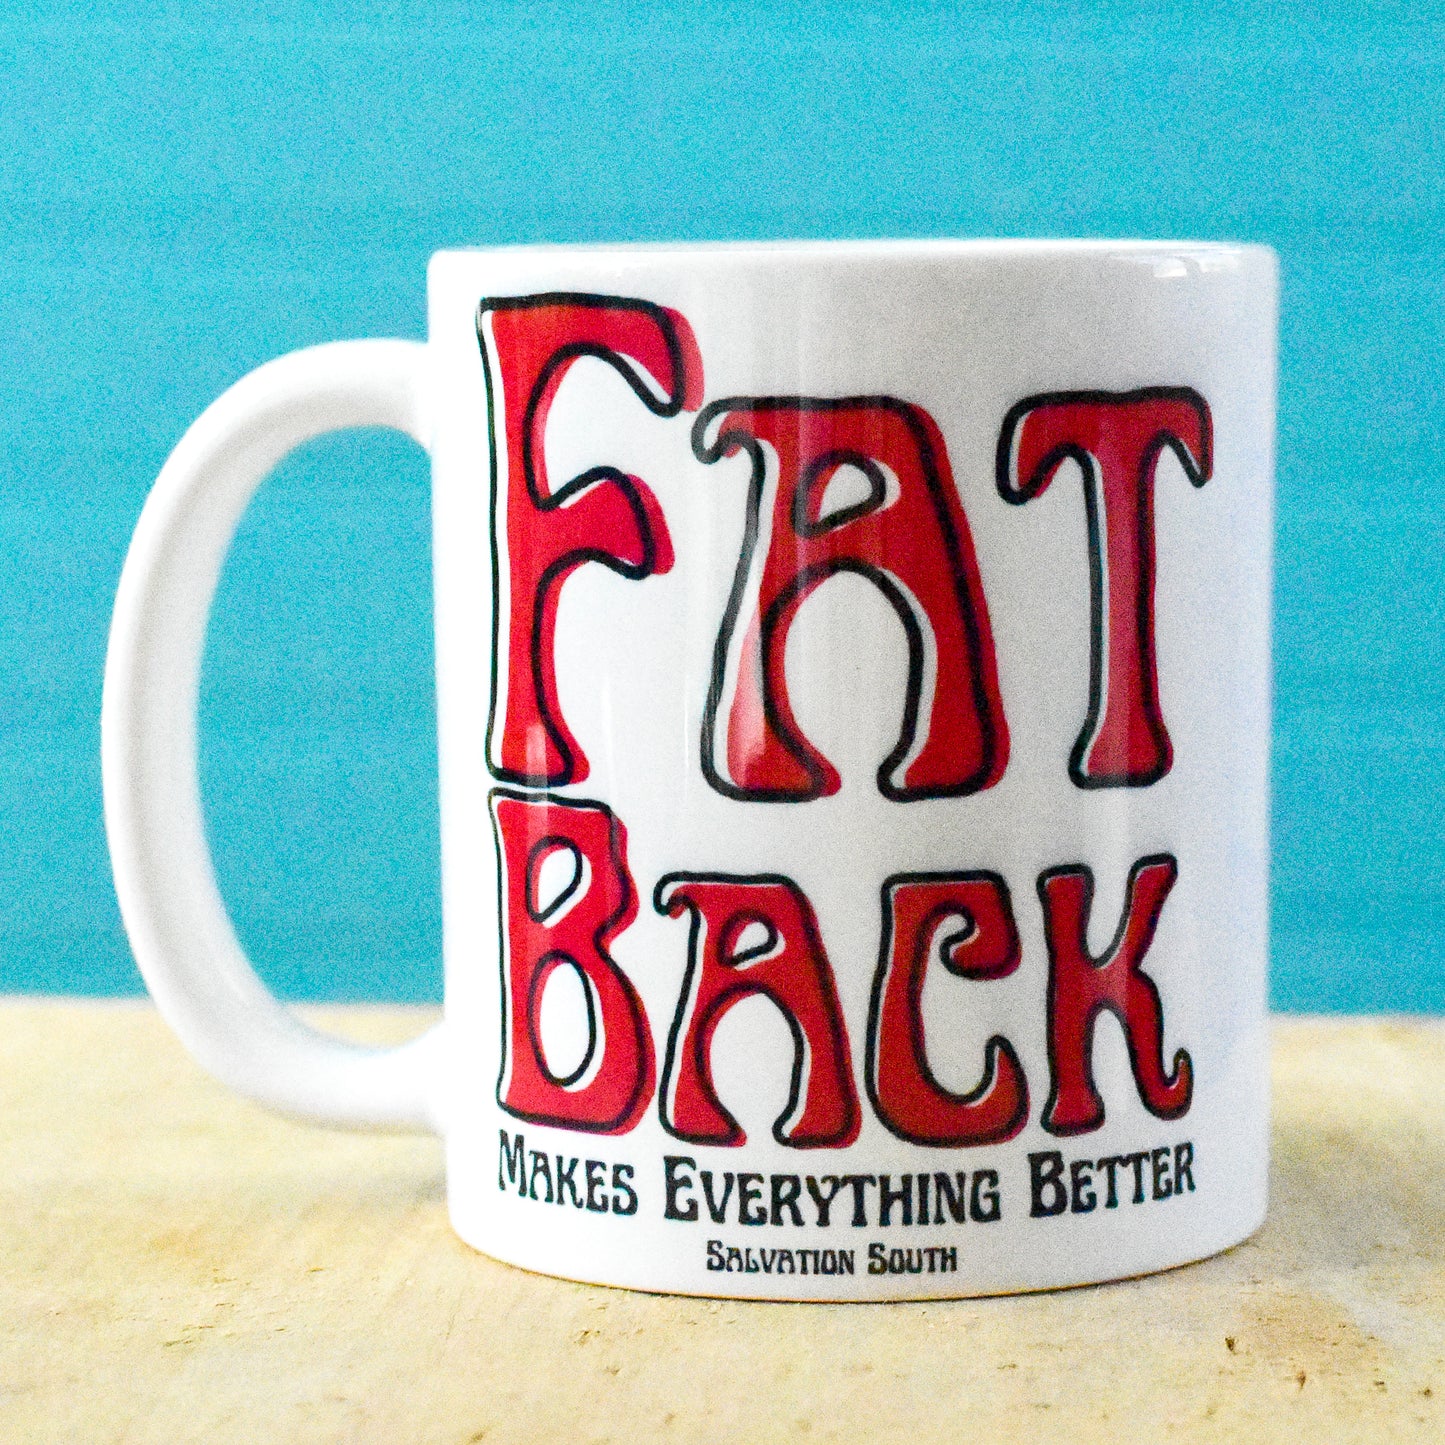 The Fat Back Makes Everything Better Coffee Mug